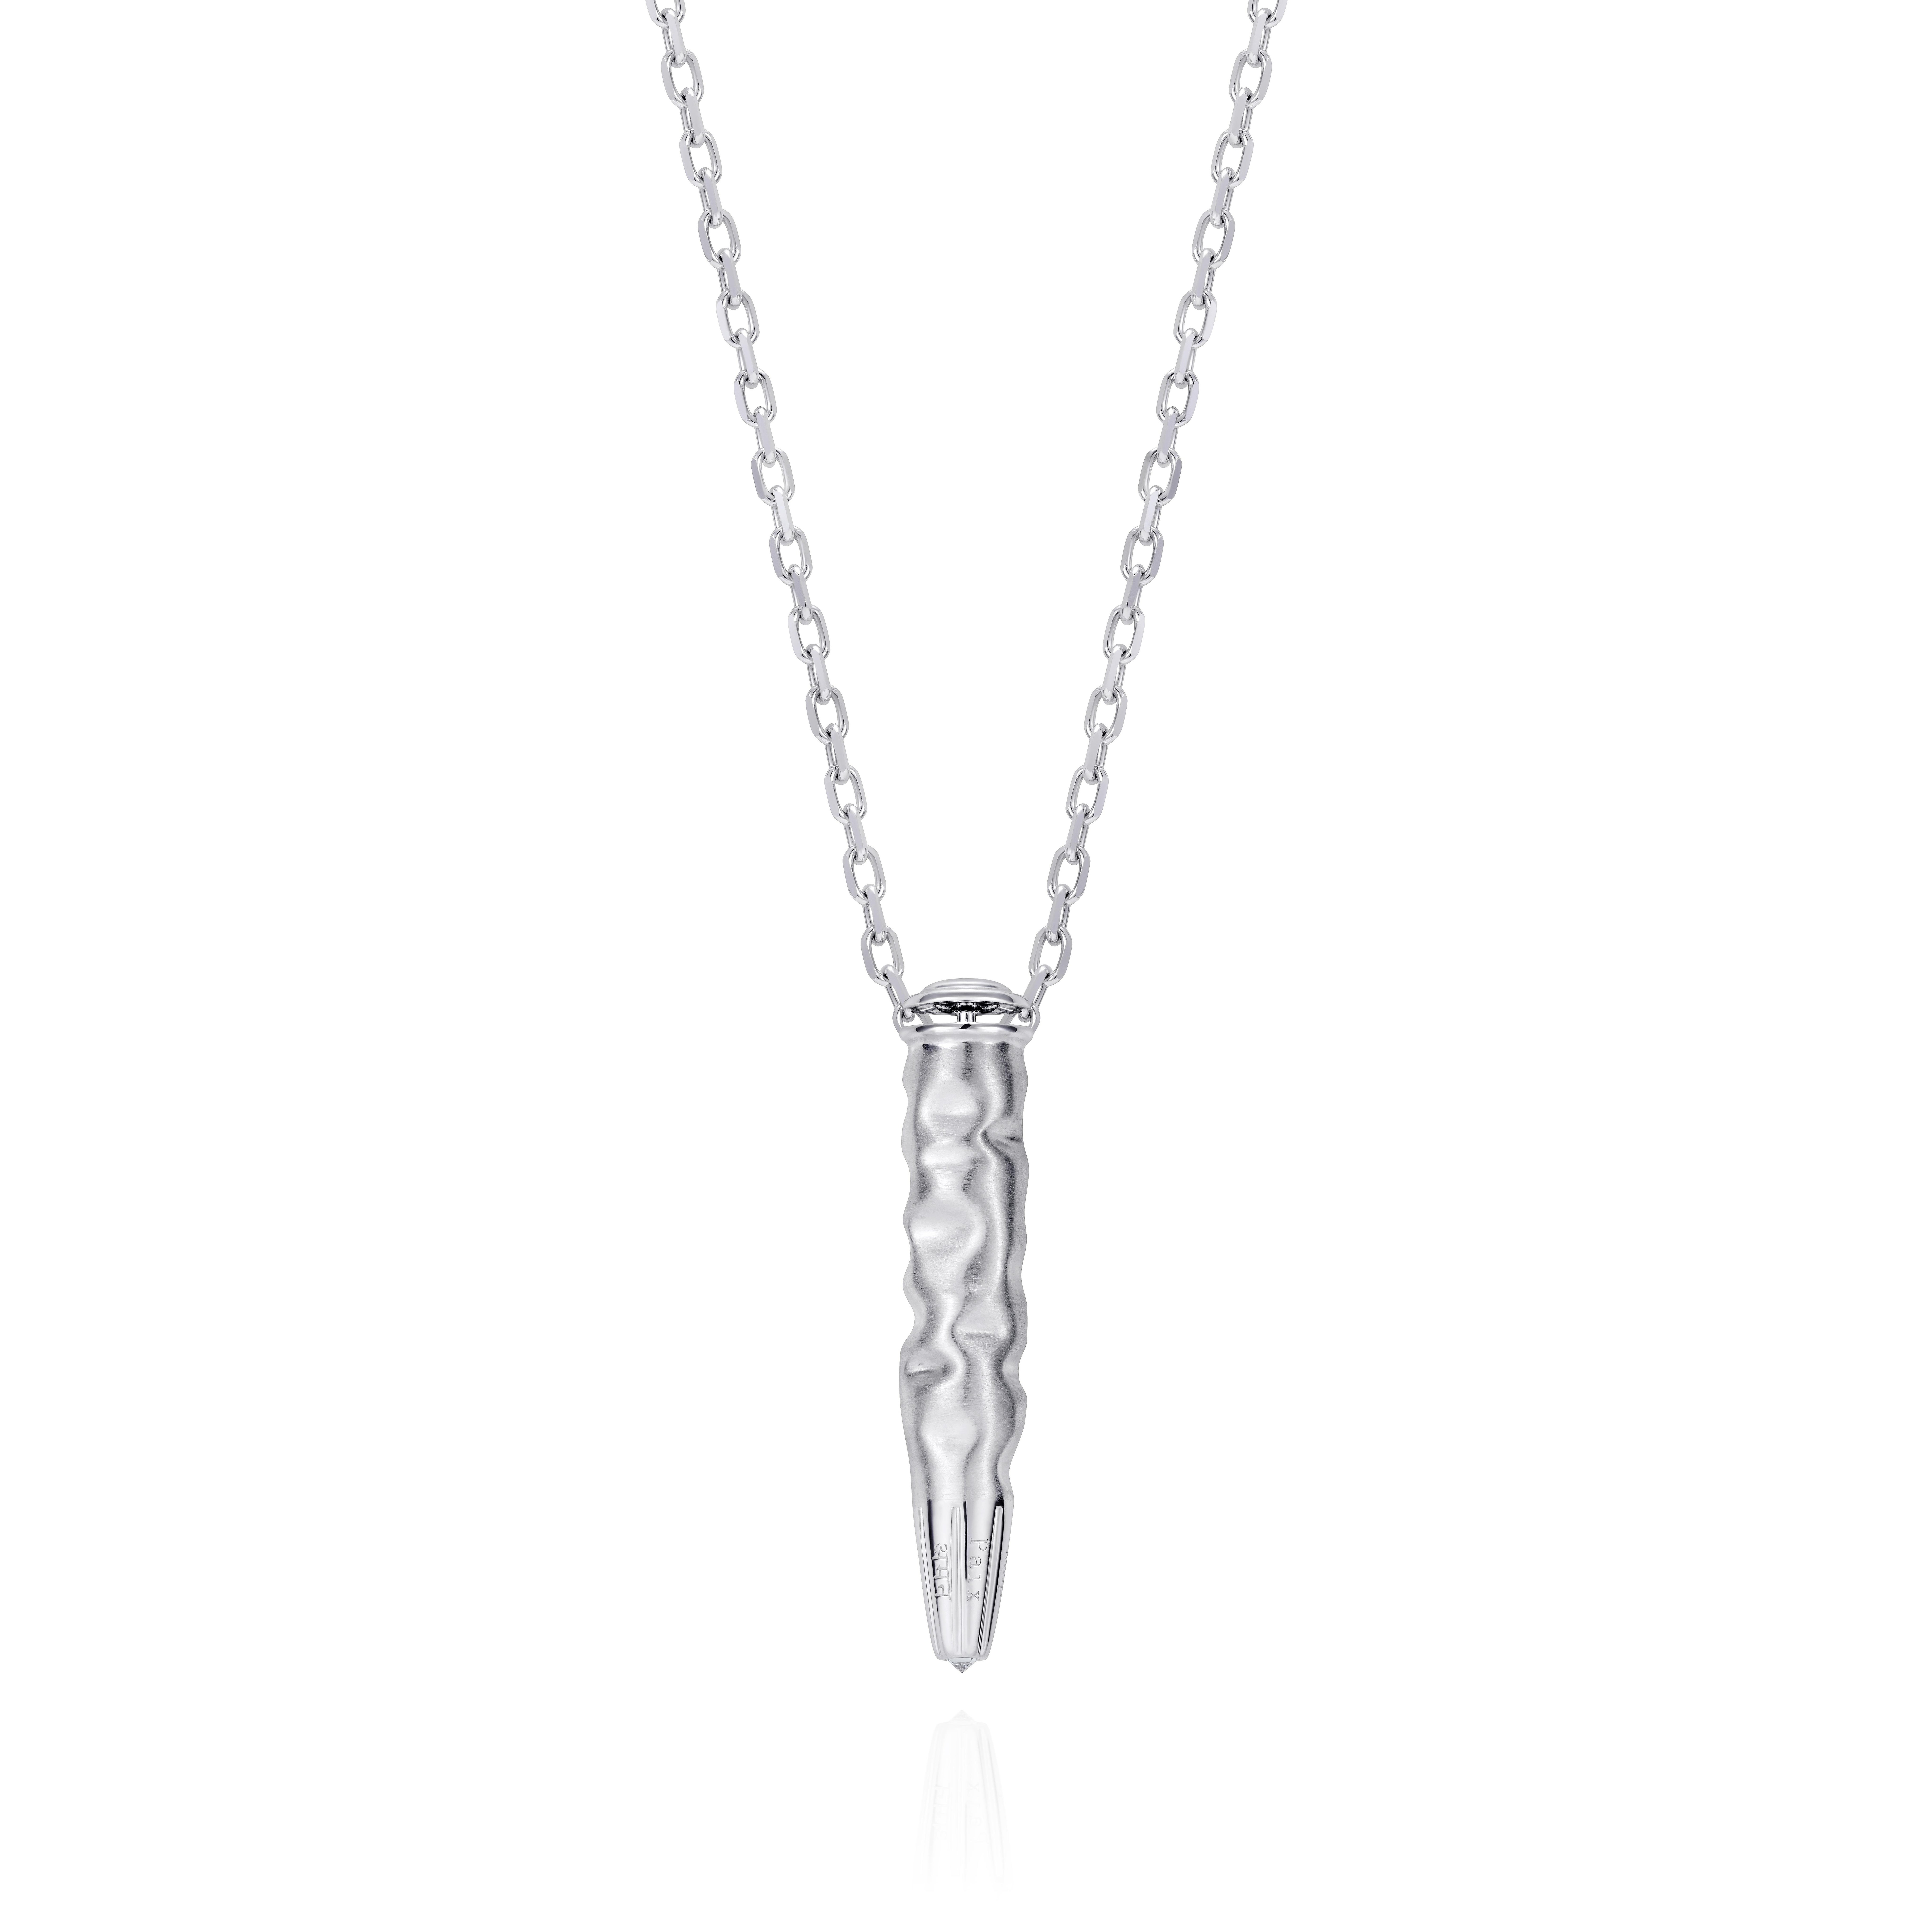 18 Karat White Gold Pendant Set With a Diamond

The Bullet Peace pendant, pays tribute to the photographer, designer’s beloved friend, Leila Alaoui who did not survive the terrorist attack in Ouagadougou on January 15th 2016. Leila was working on a